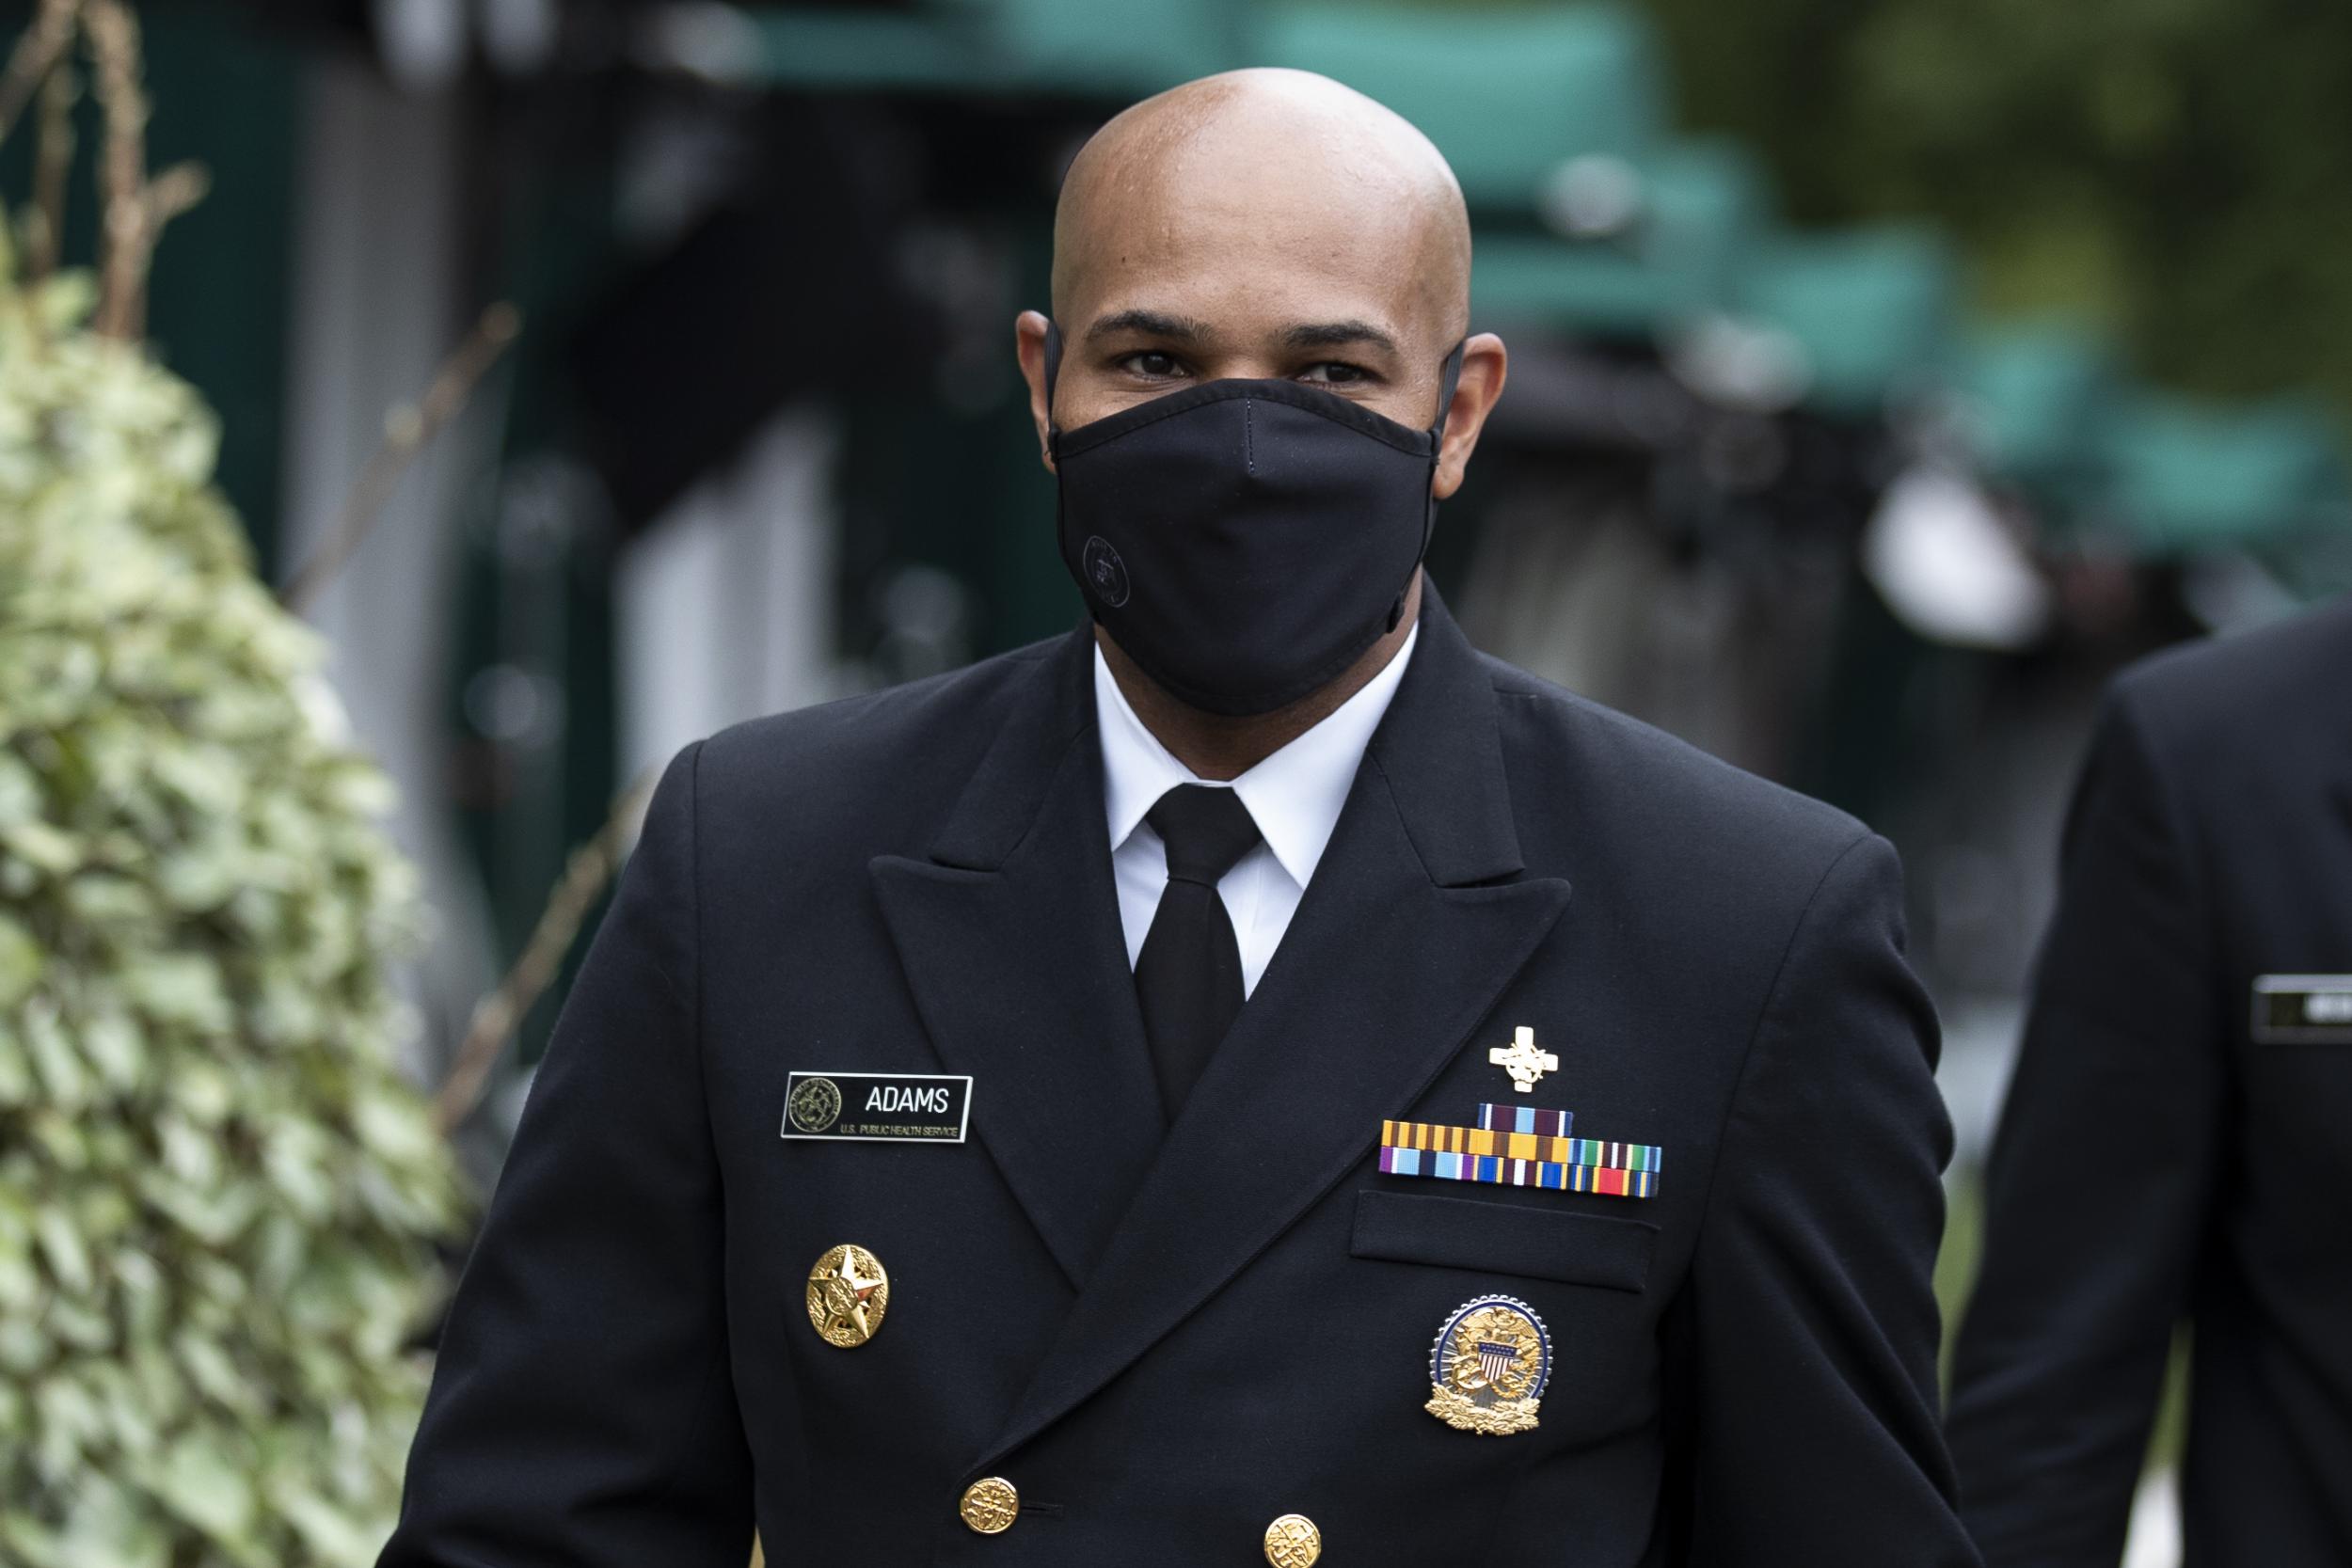 Surgeon general told Trump 'you look badass in a face mask' after people in Florida told him to